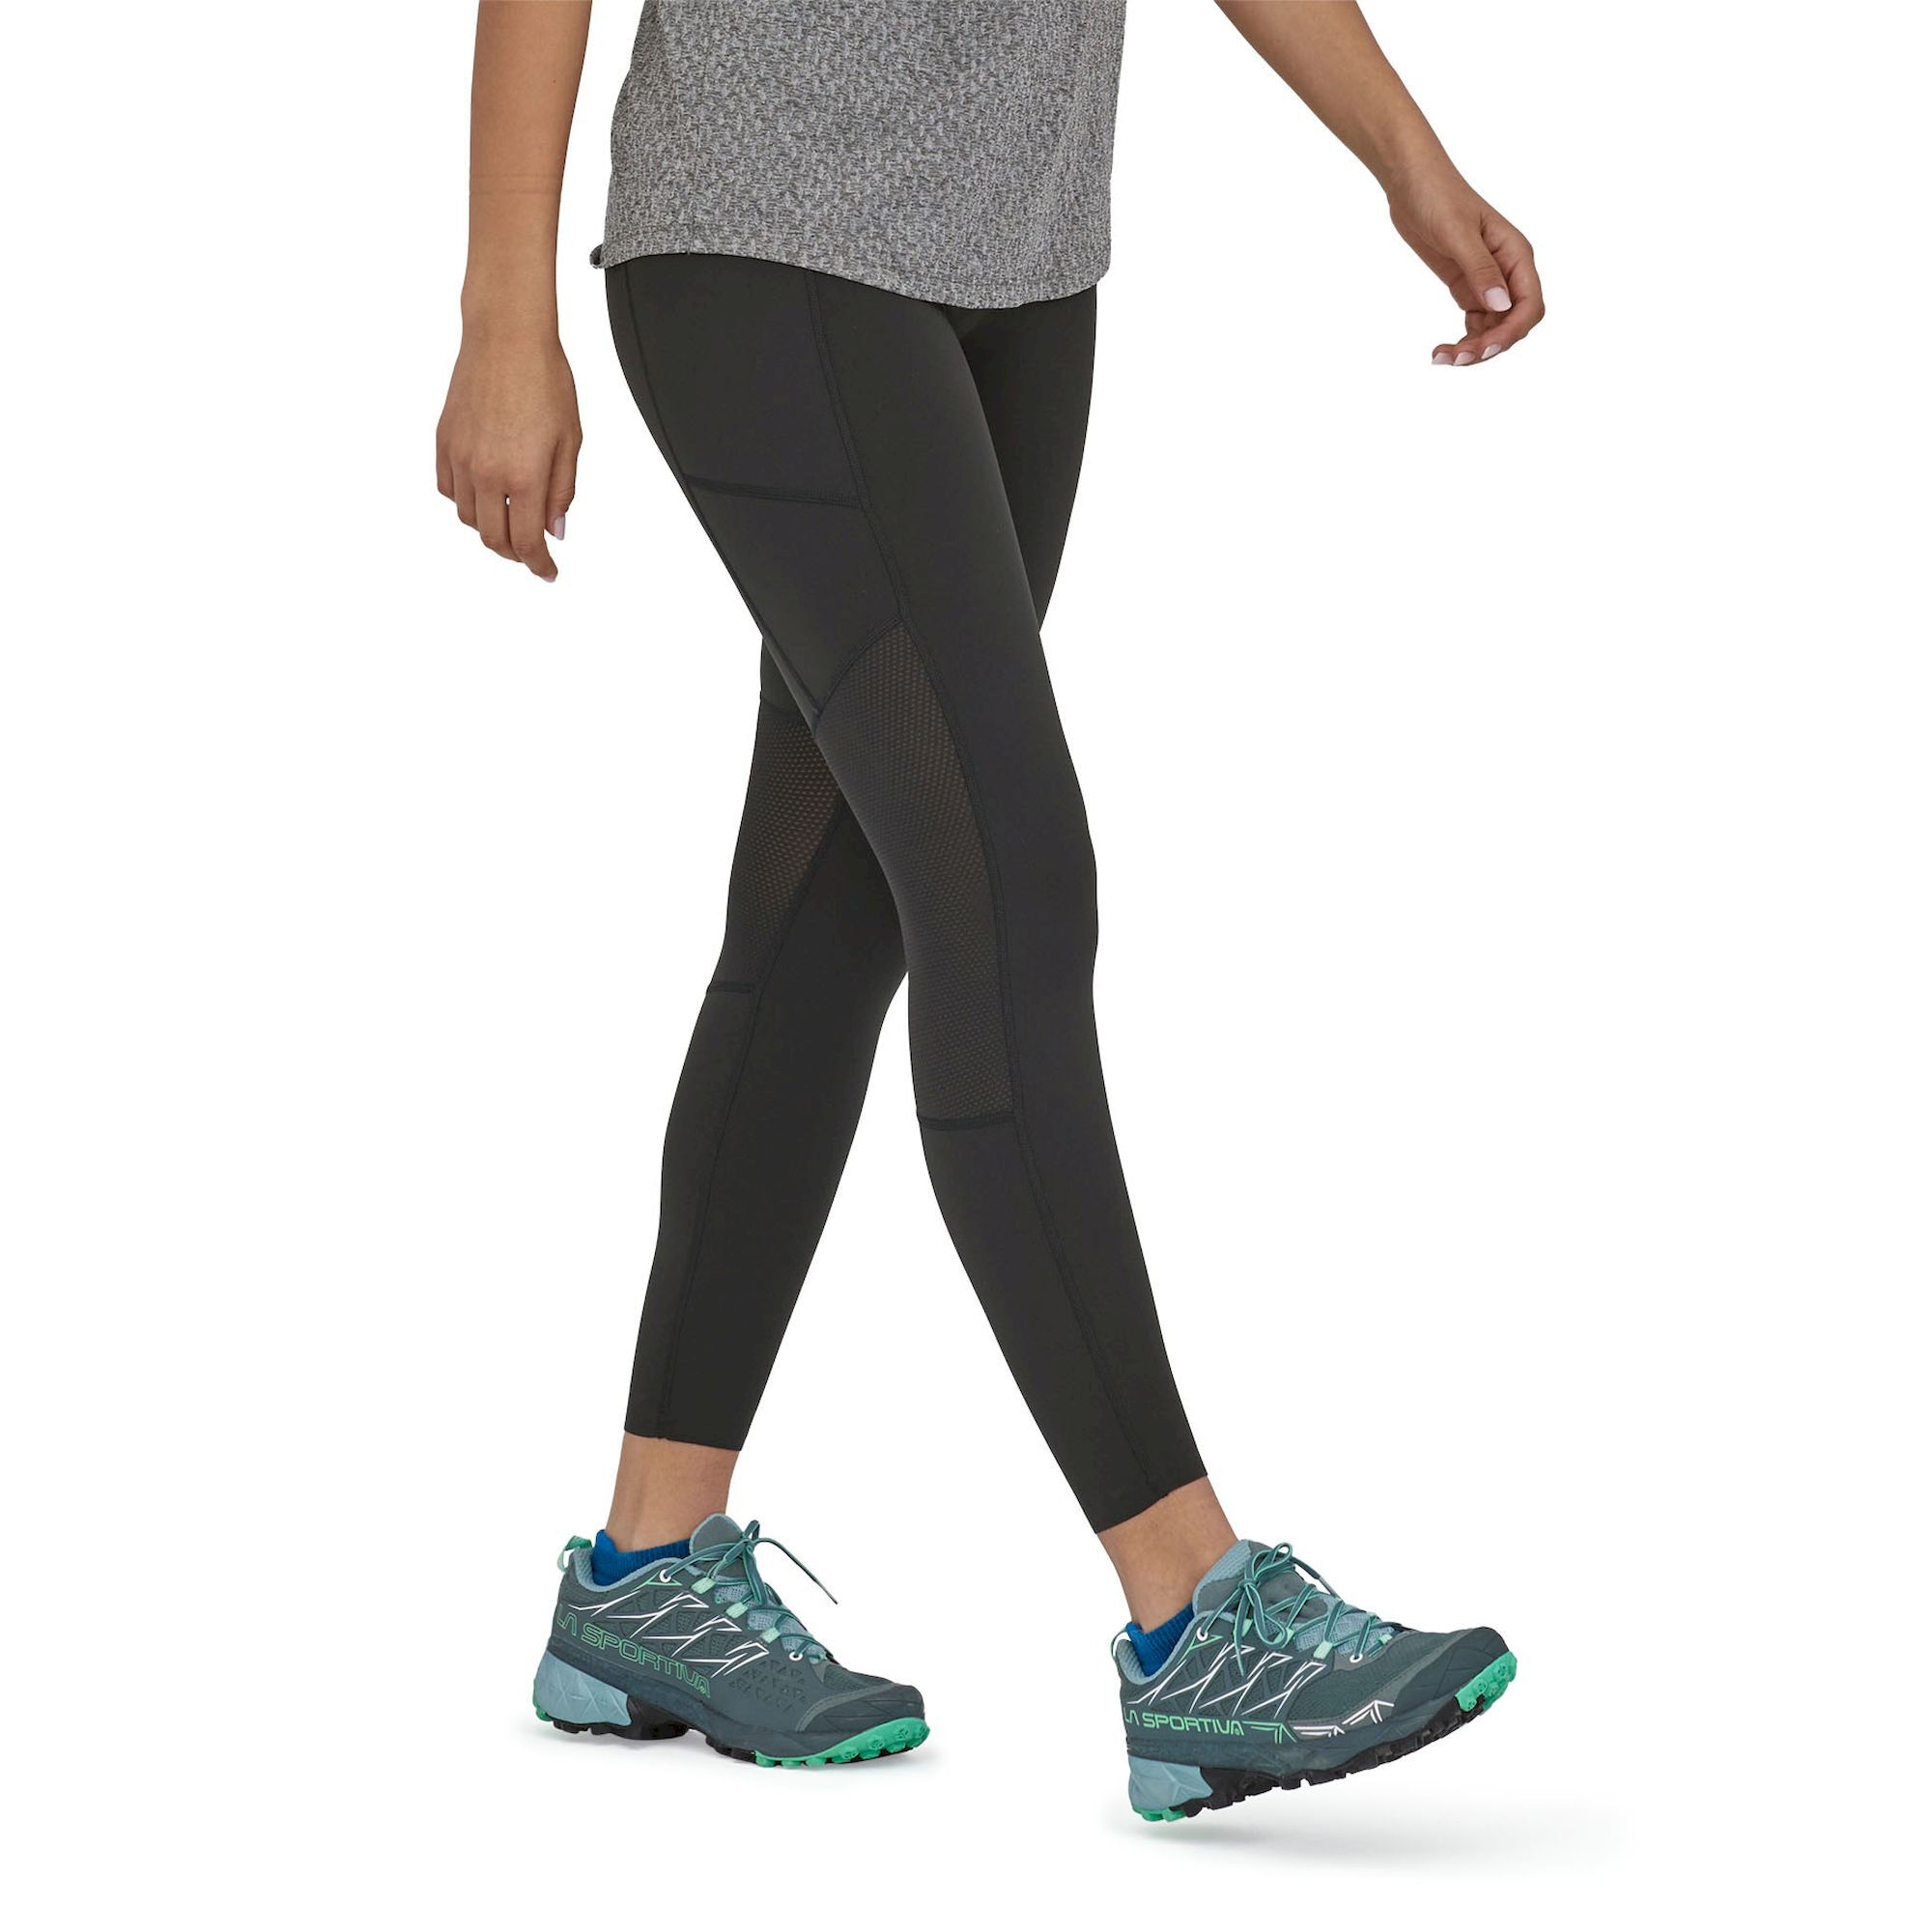 Patagonia W's Endless Run 7/8 Tights - Collant running femme | Hardloop